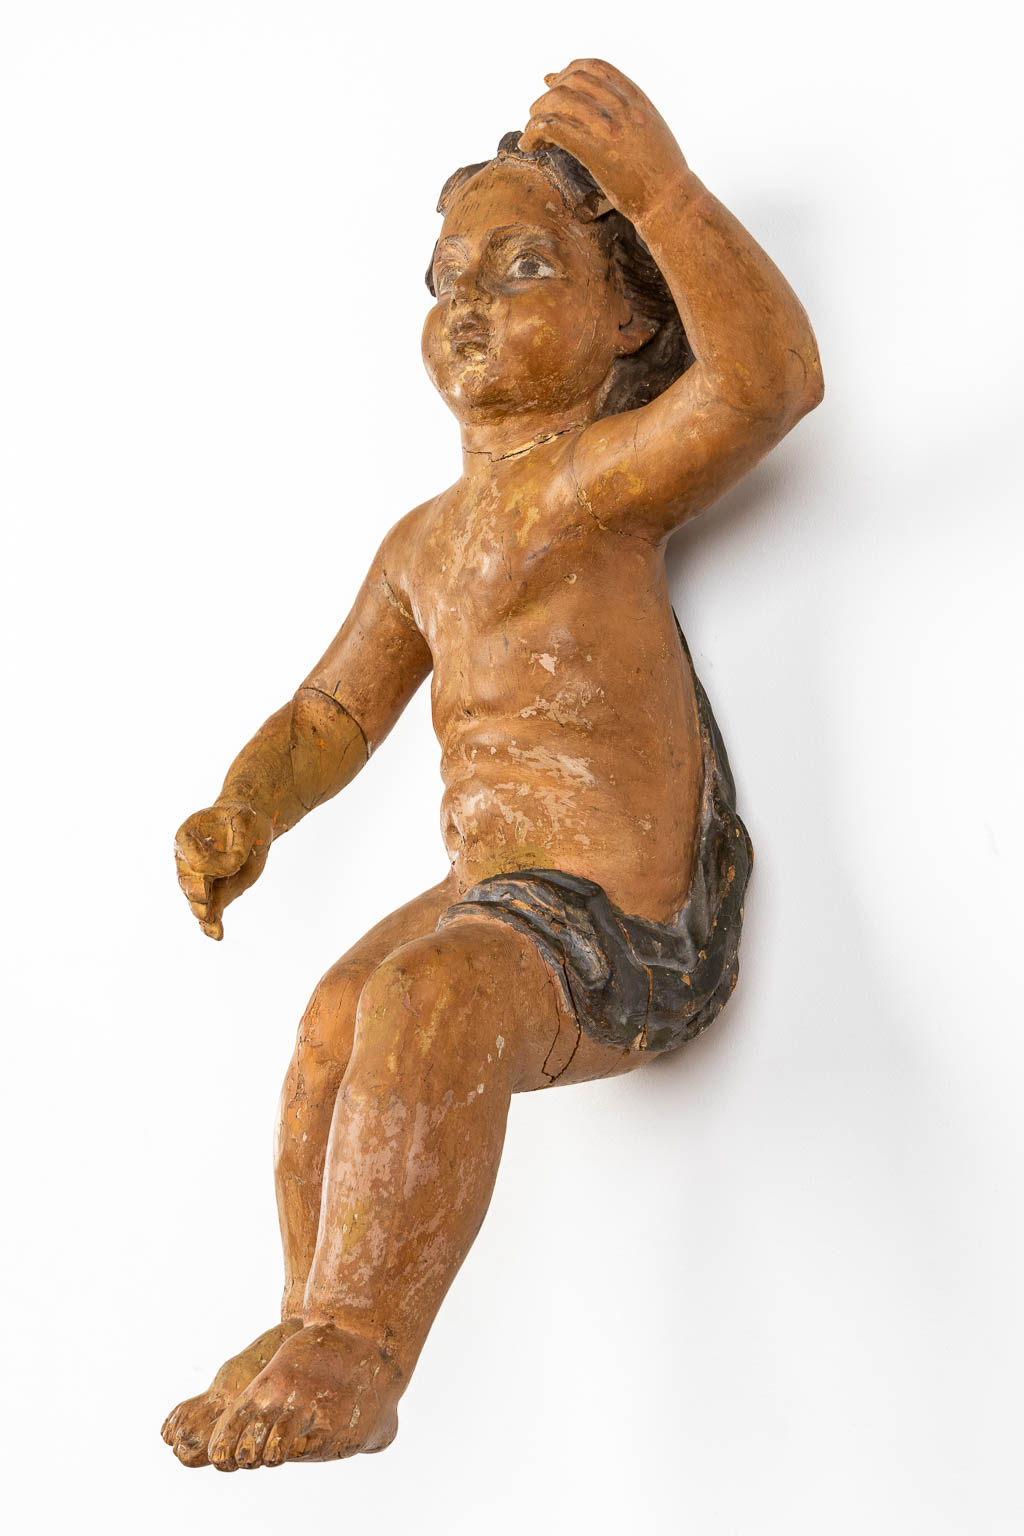 An antique figurine of a putto, sculptured and patinated wood. 18th C. (L:35 x W:34 x H:67 cm)